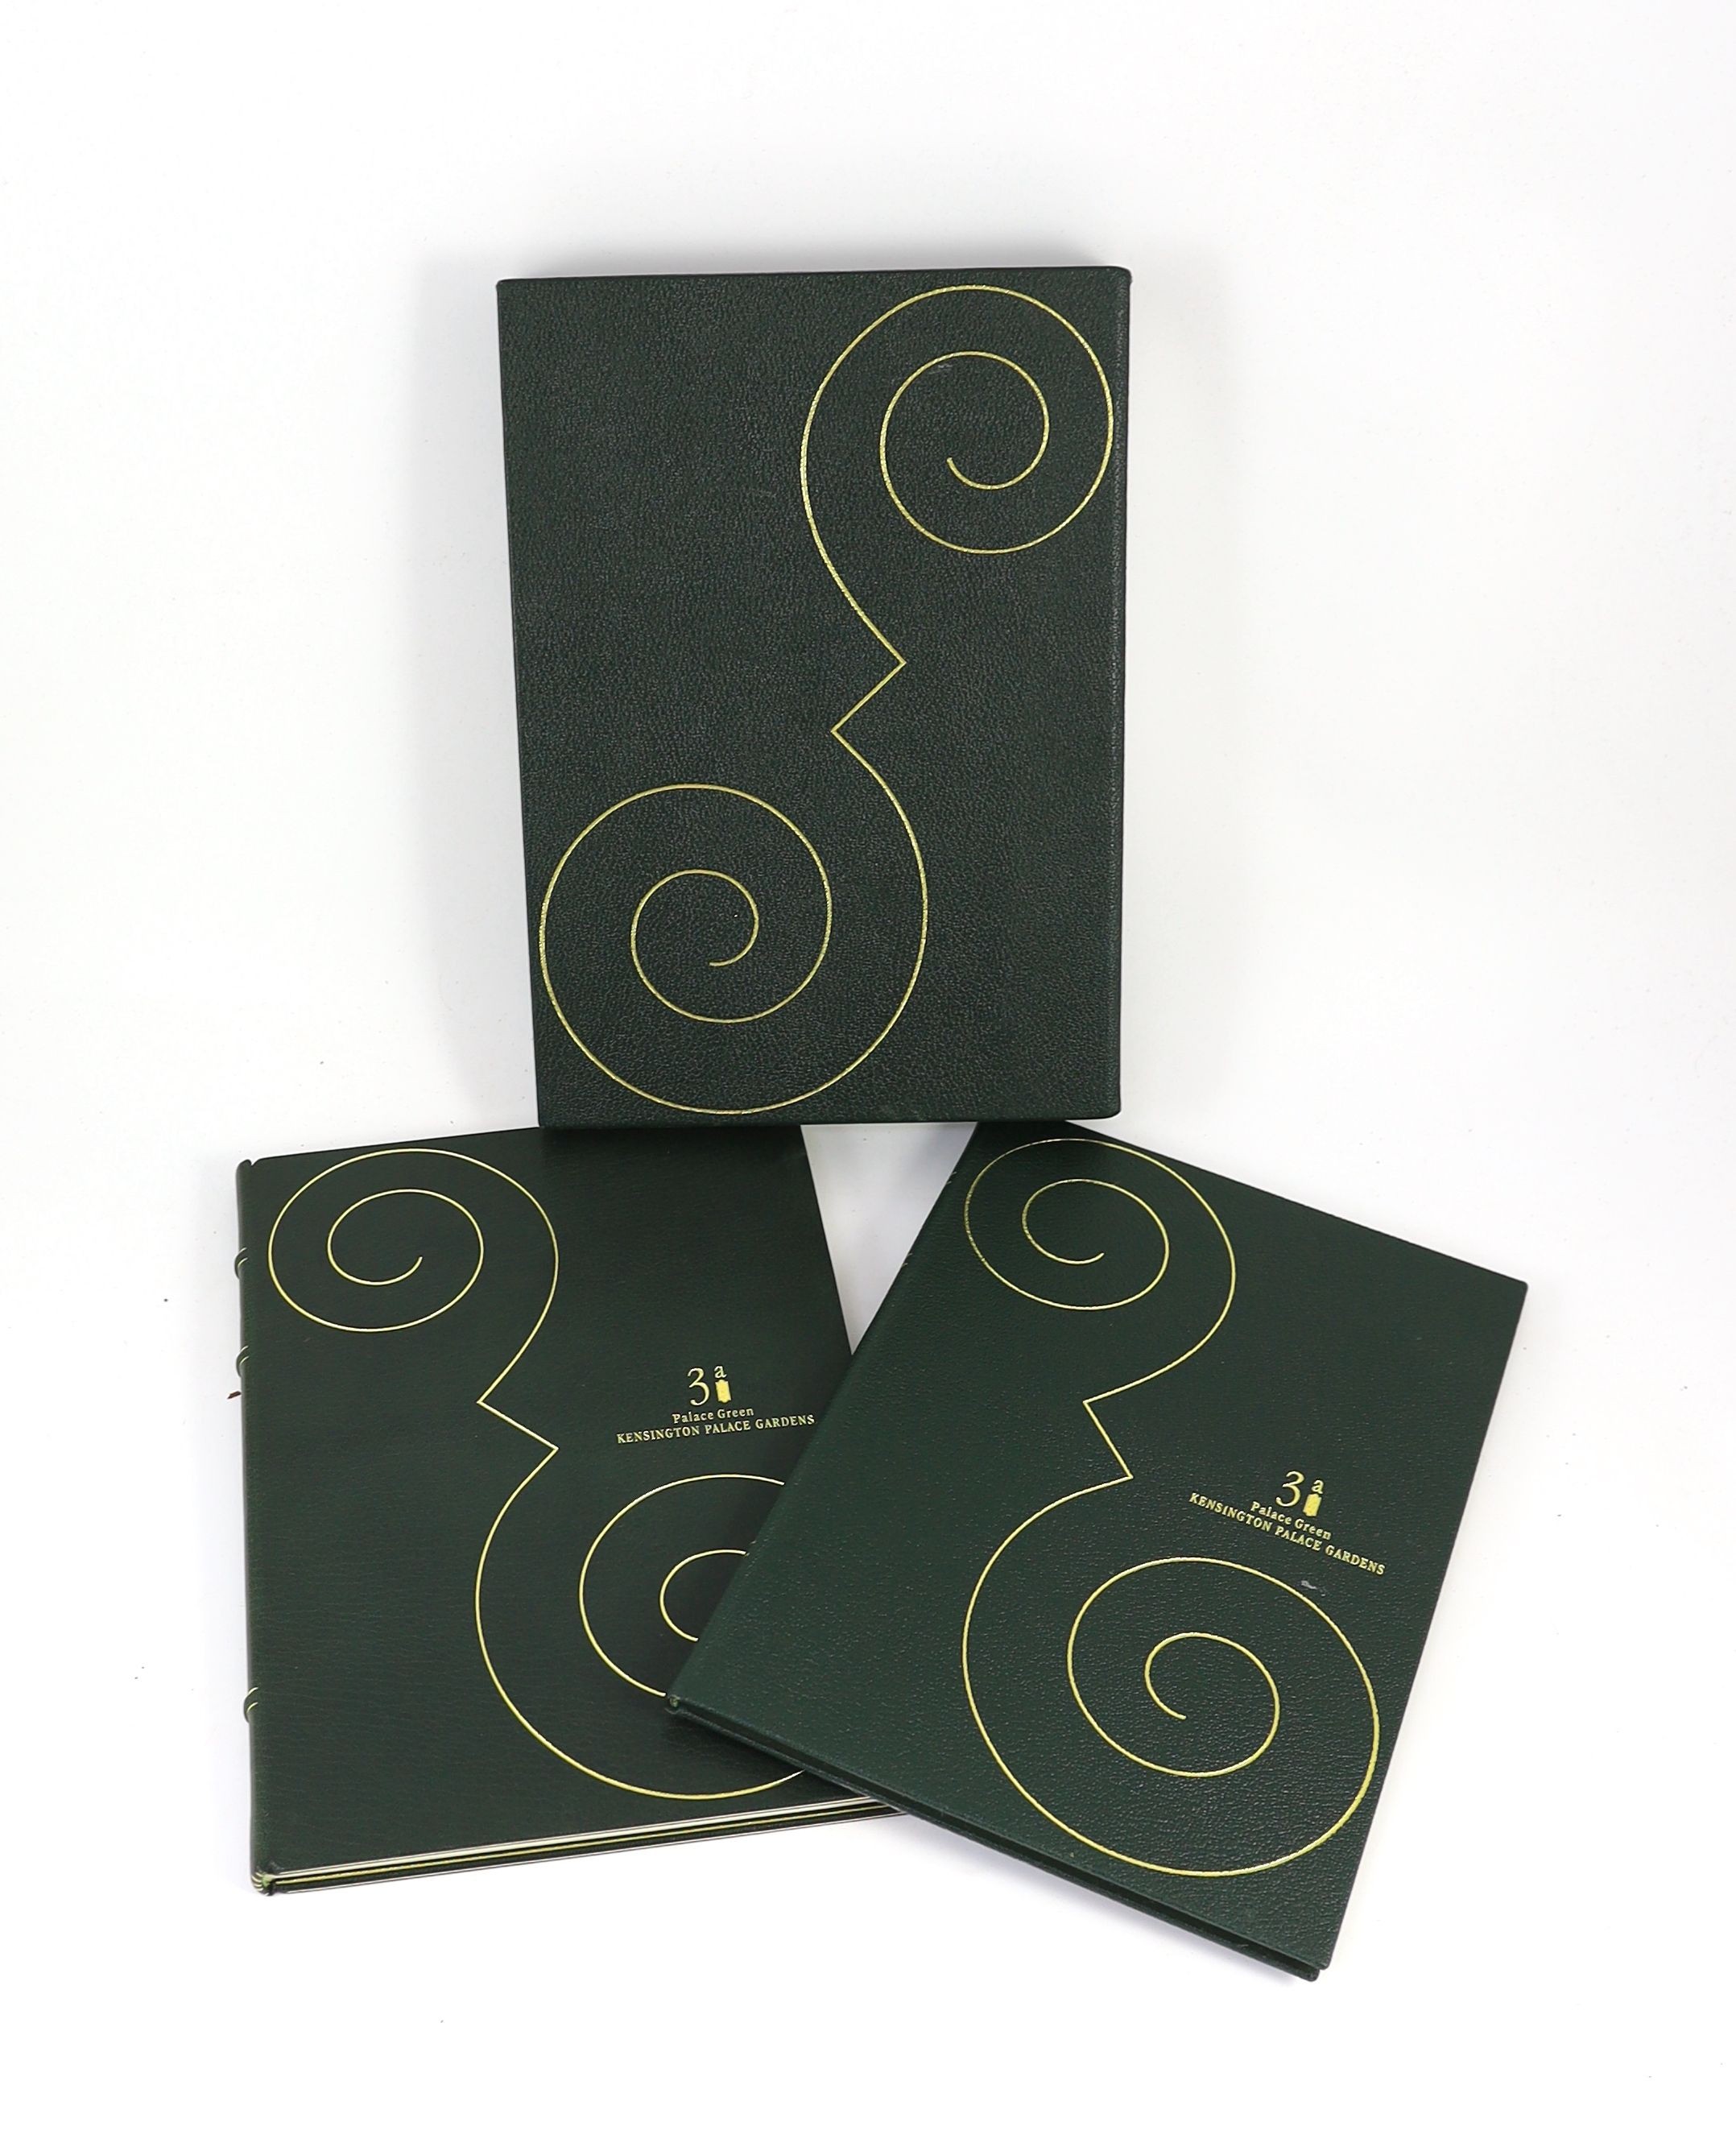 Sales prospectus for 3a, Palace Green, Kensington Palace Gardens, London, 2 vols, text by Jacquey Visick, 4to, green crushed morocco by Zaehndorf, London, 1991, in slip case.